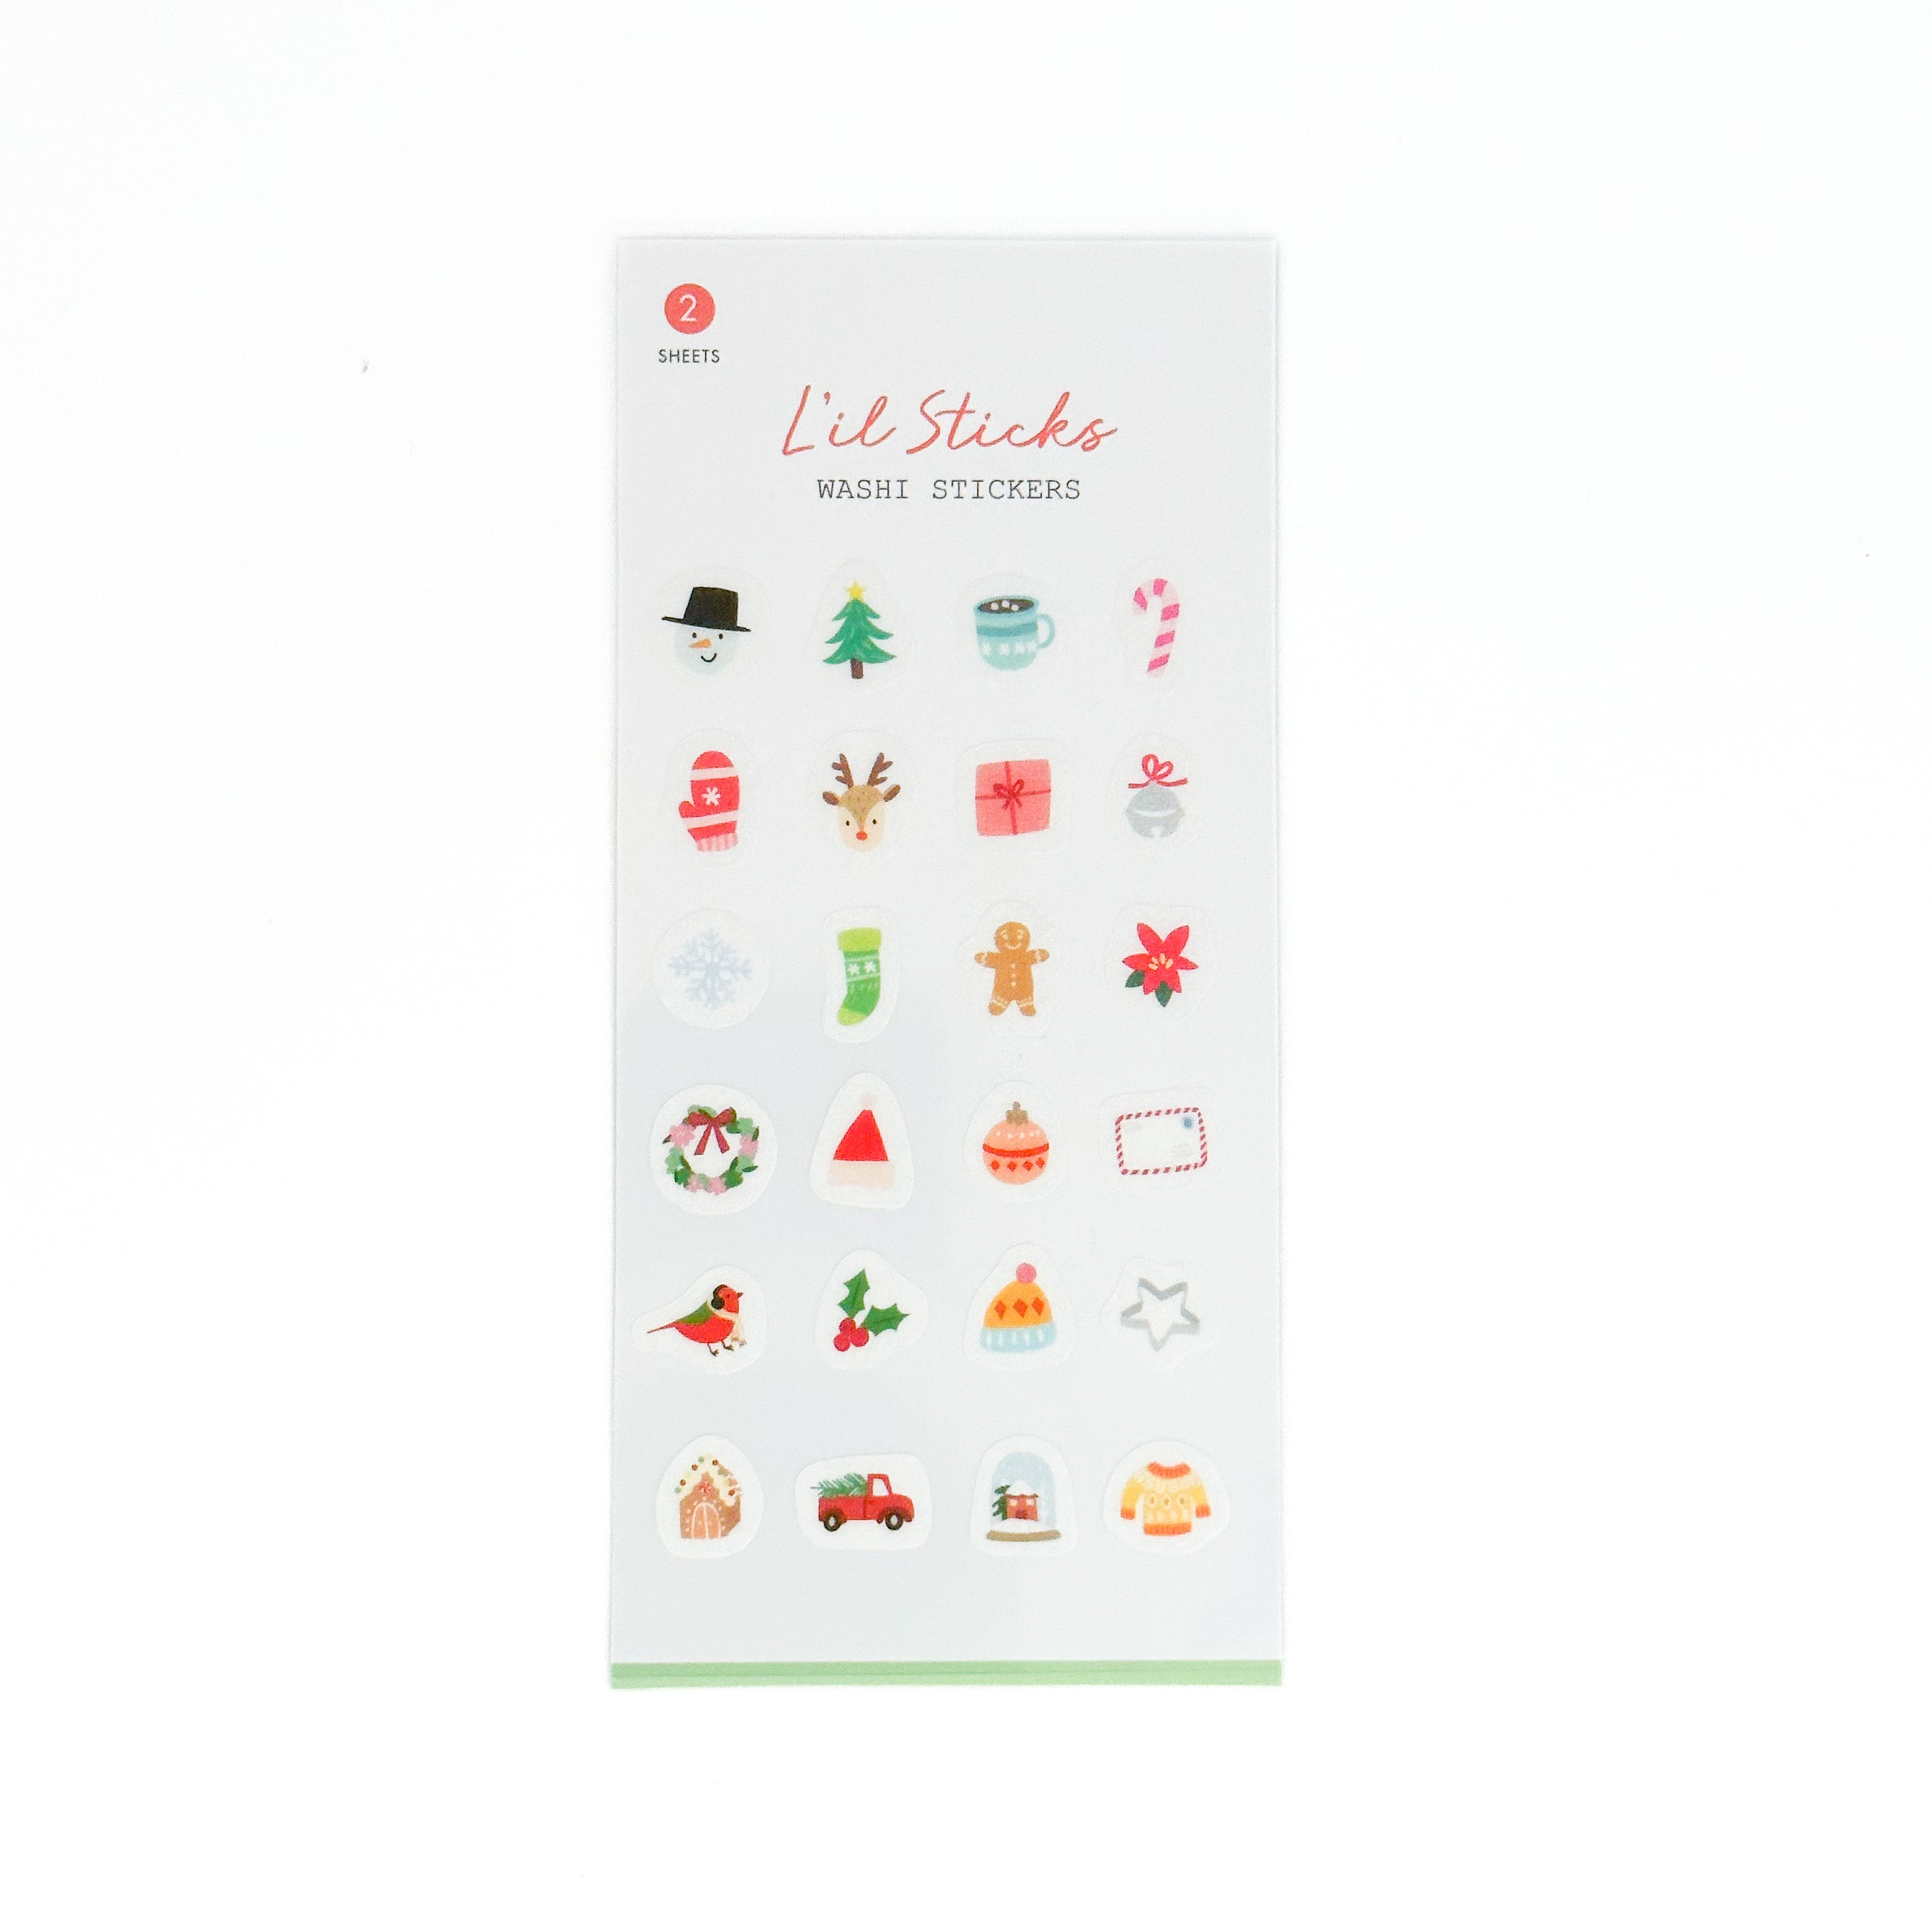 These christmas stickers are carefully crafted with intricate details, offering a charming assortment of designs that are ideal for planning, marking important events, or adding decorative touches to your pages. These are from Girl of all Work and sold at BBB Supplies Craft Shop.